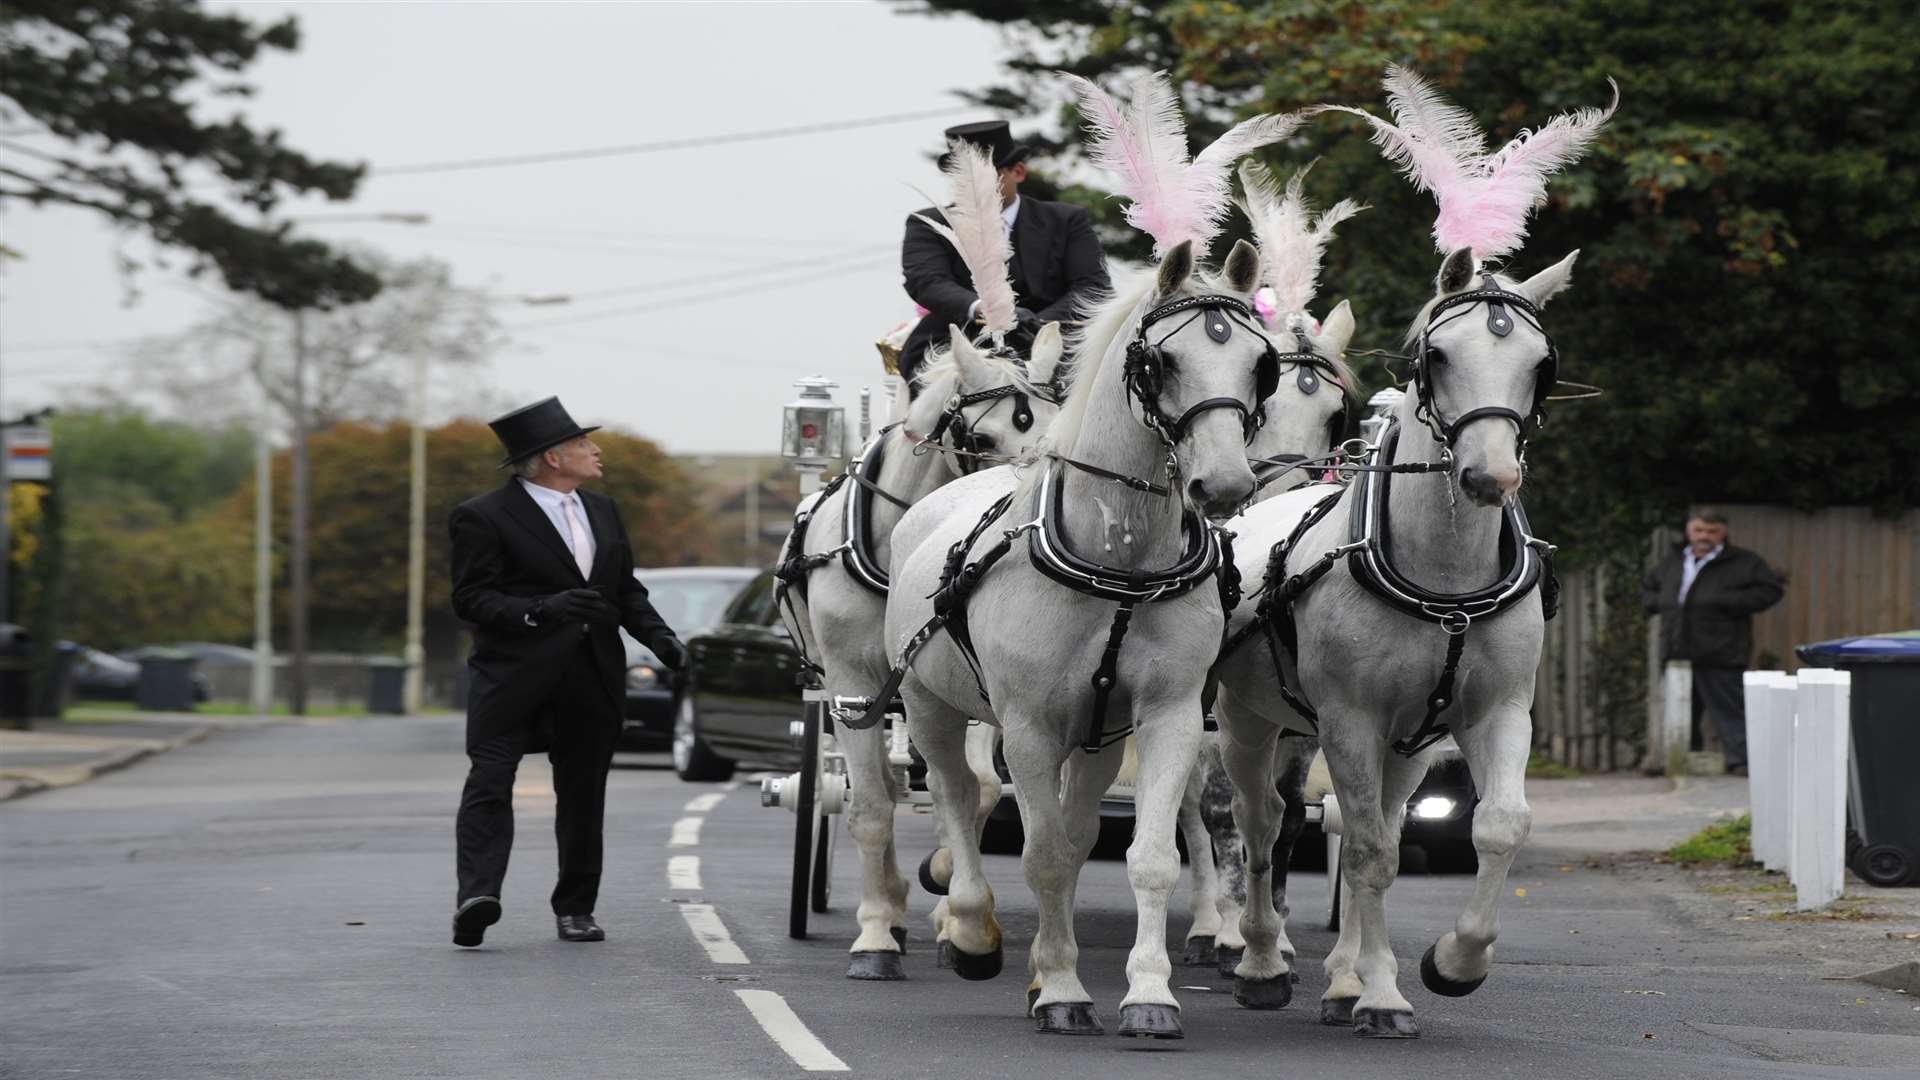 The funeral procession